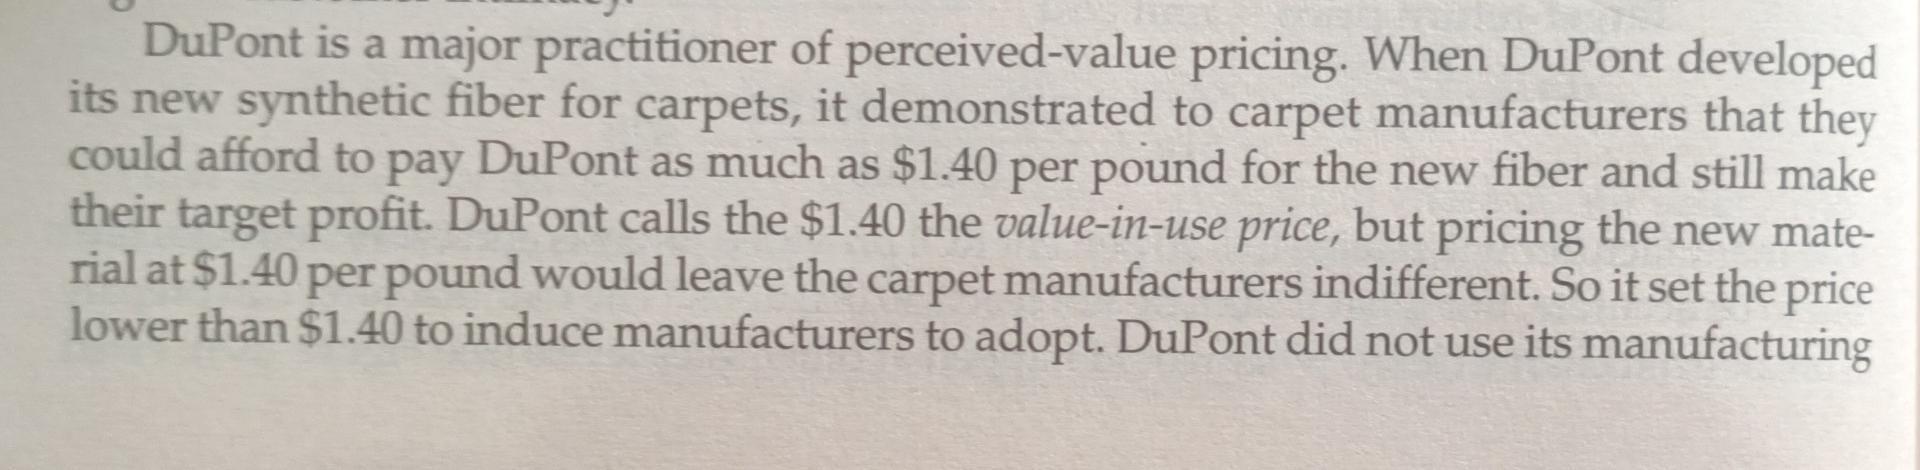 DuPont is a major practitioner of perceived-value pricing. When DuPont developedits new synthetic fiber for carpets, it demo